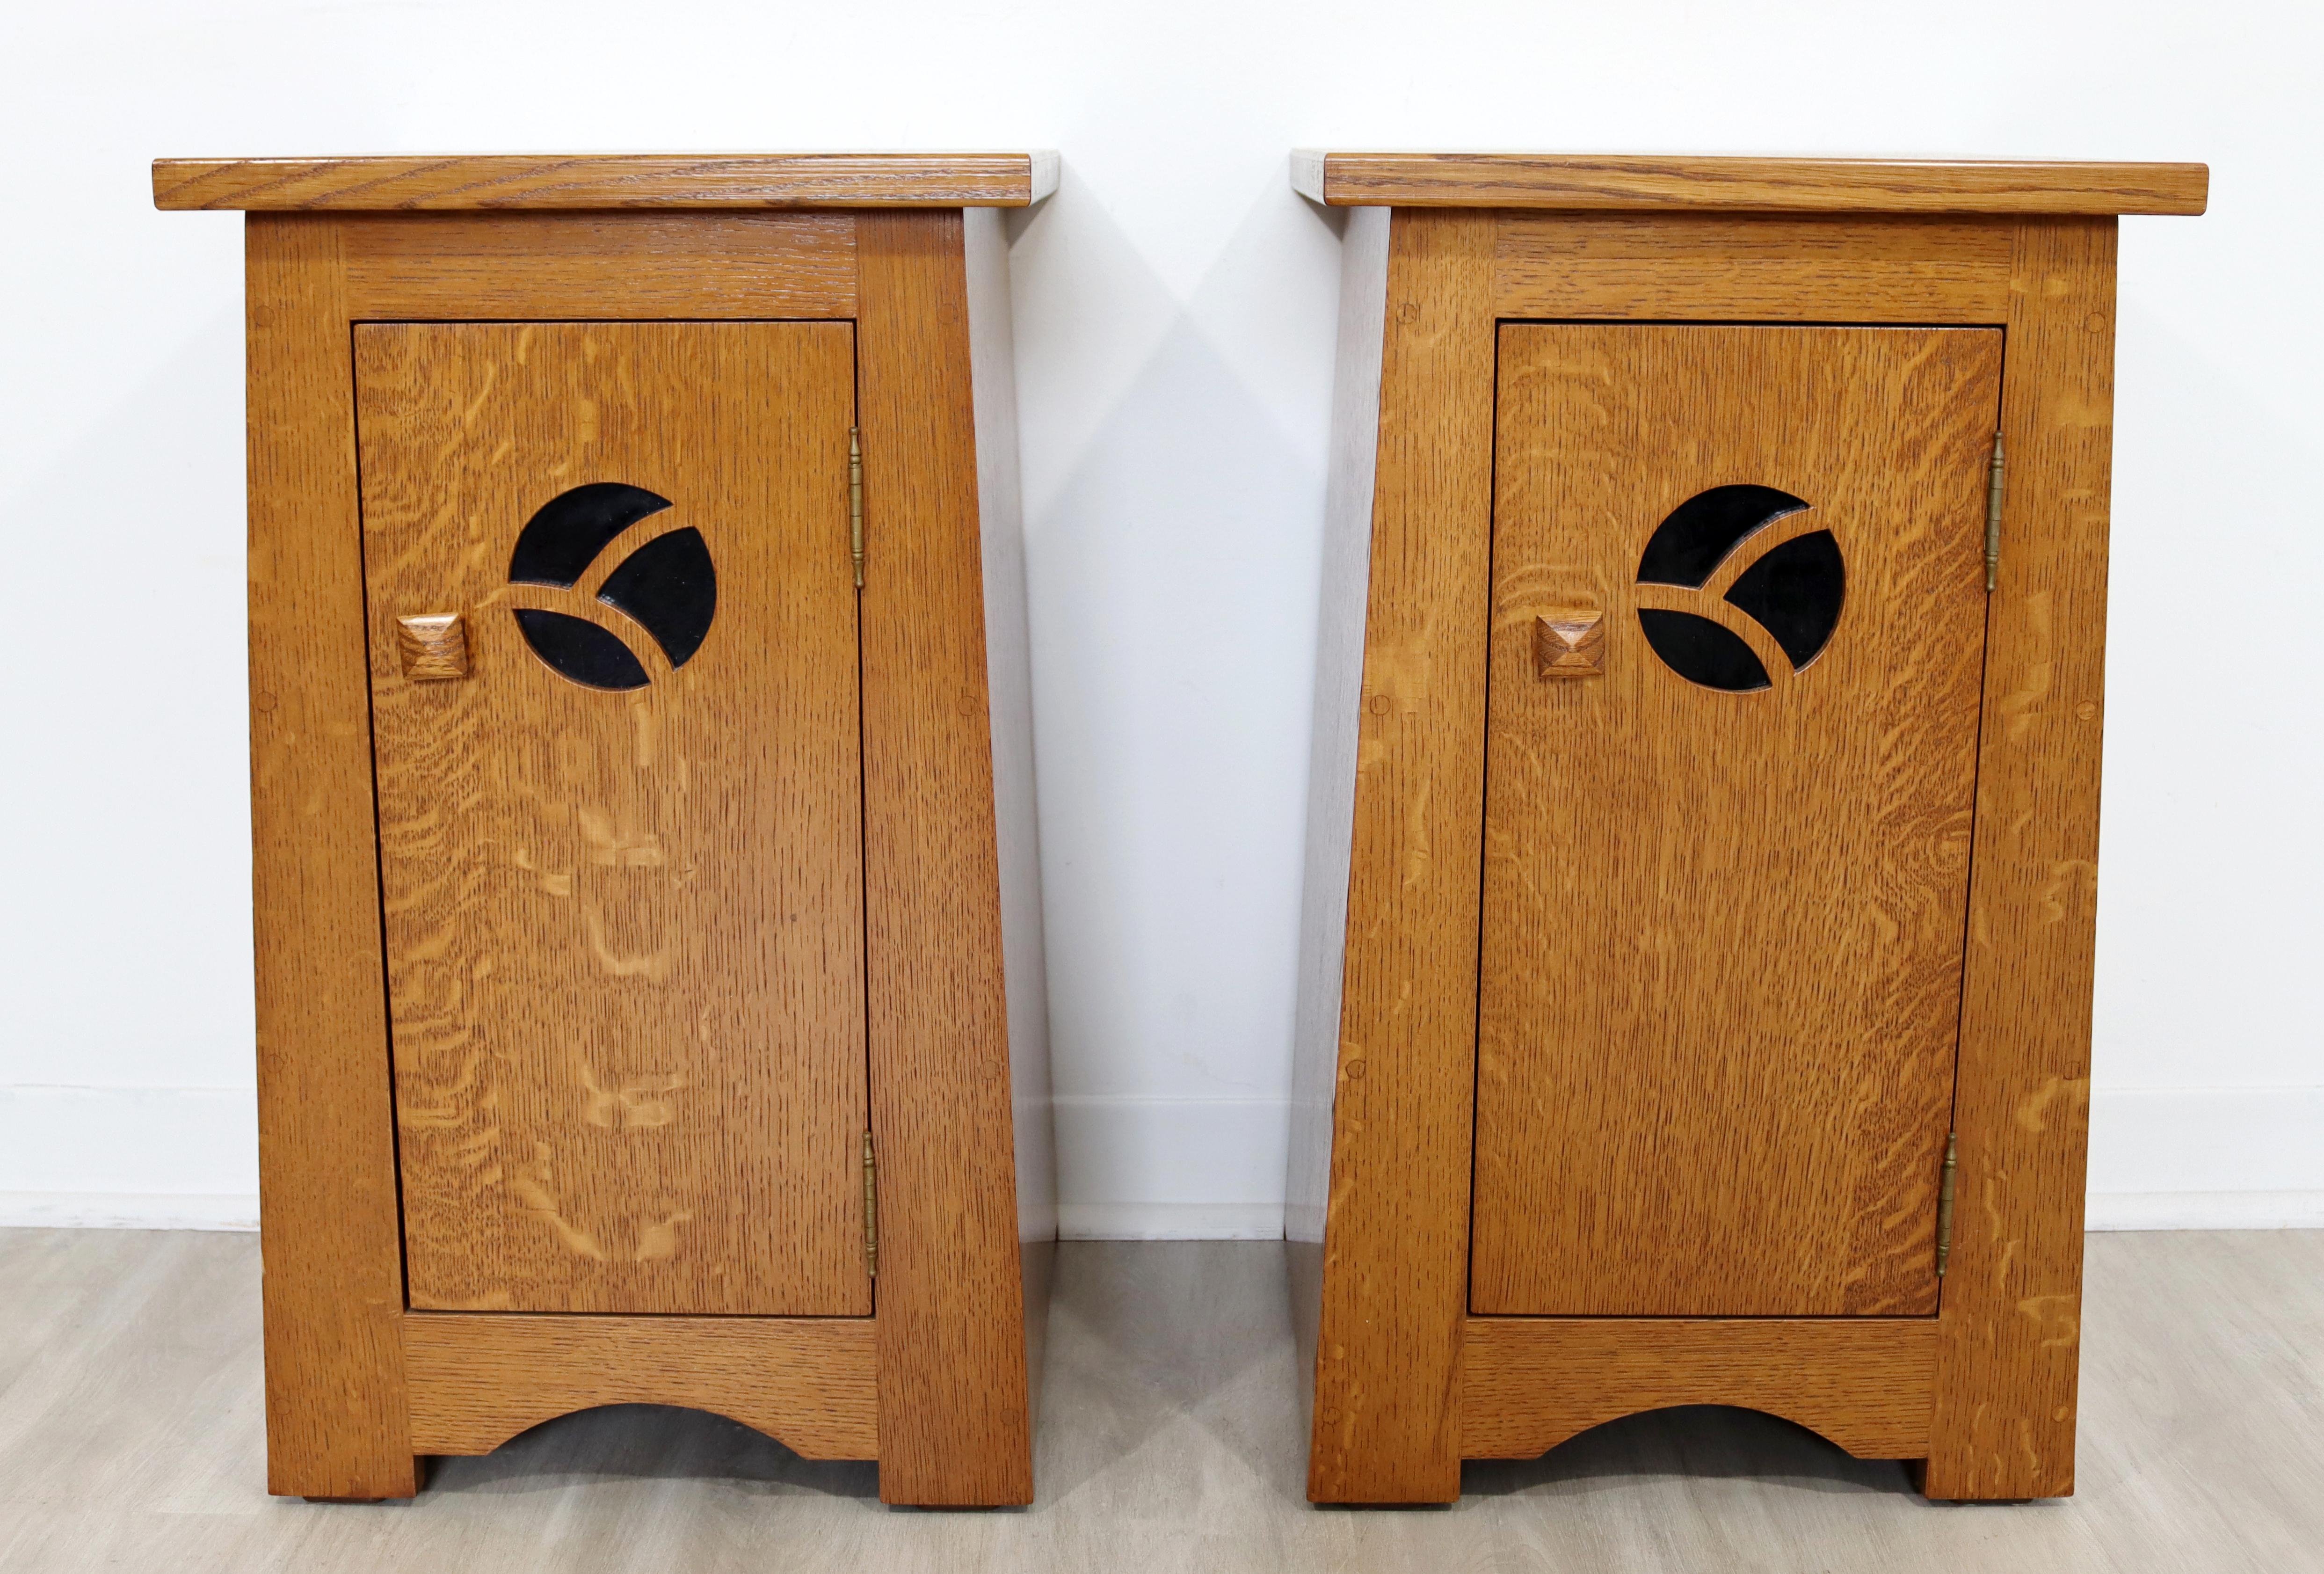 For your consideration is a stunning pair of Mission style side tables or nightstands, with inner compartments, circa the 1970s. In excellent vintage condition. The dimensions are 16